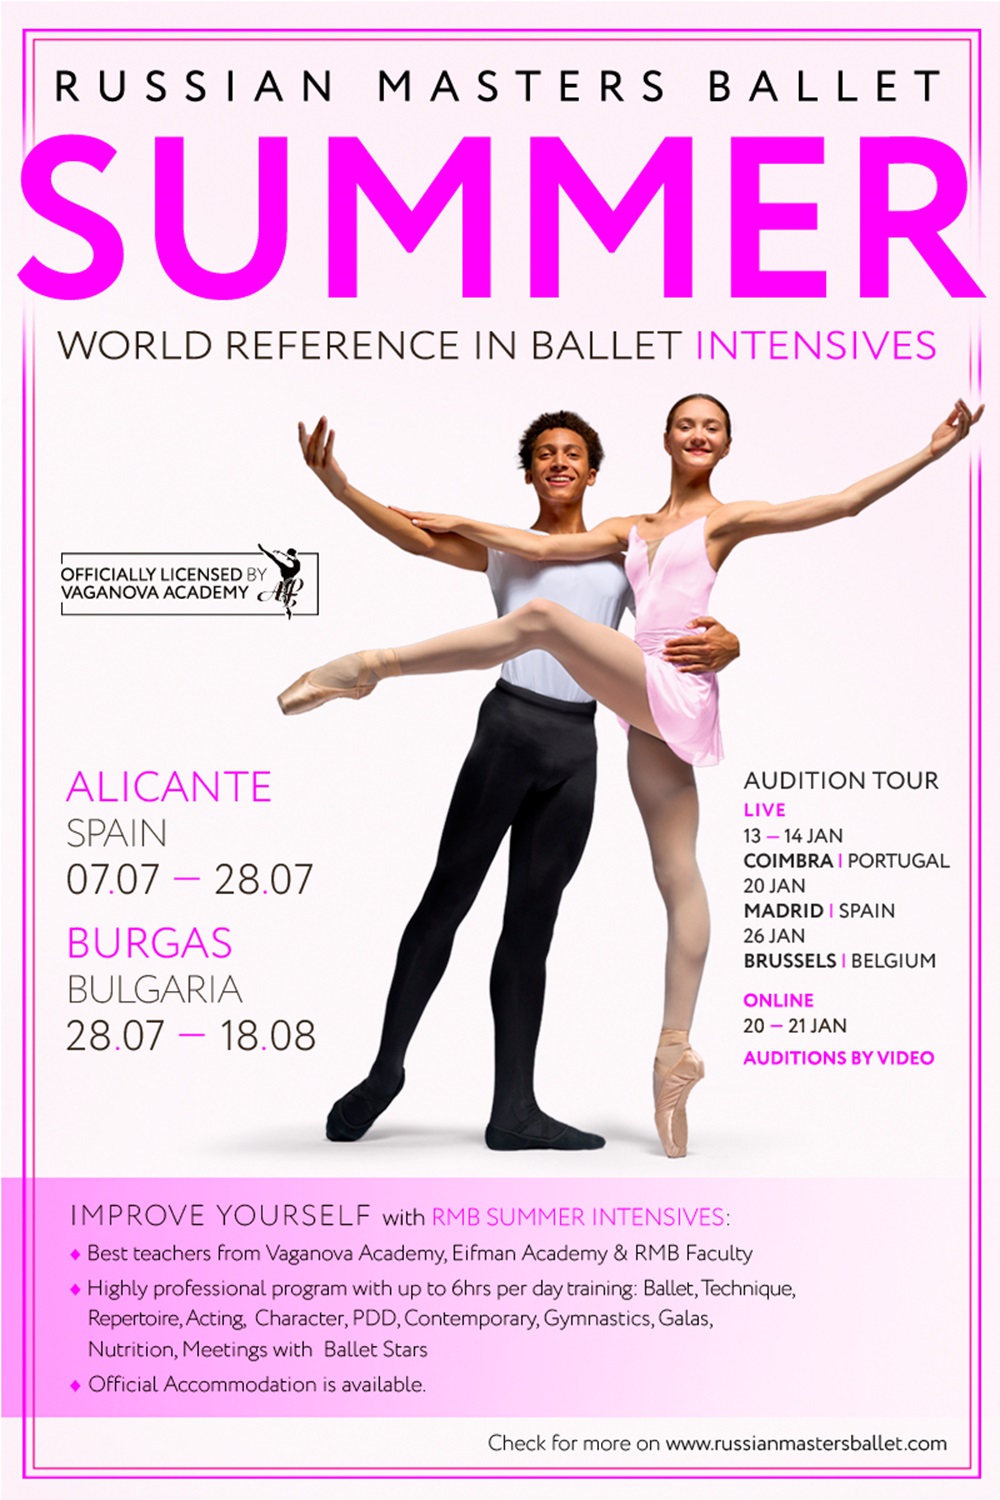 Russian Masters Ballet Summer Intensives & Auditions, Image credit RMB